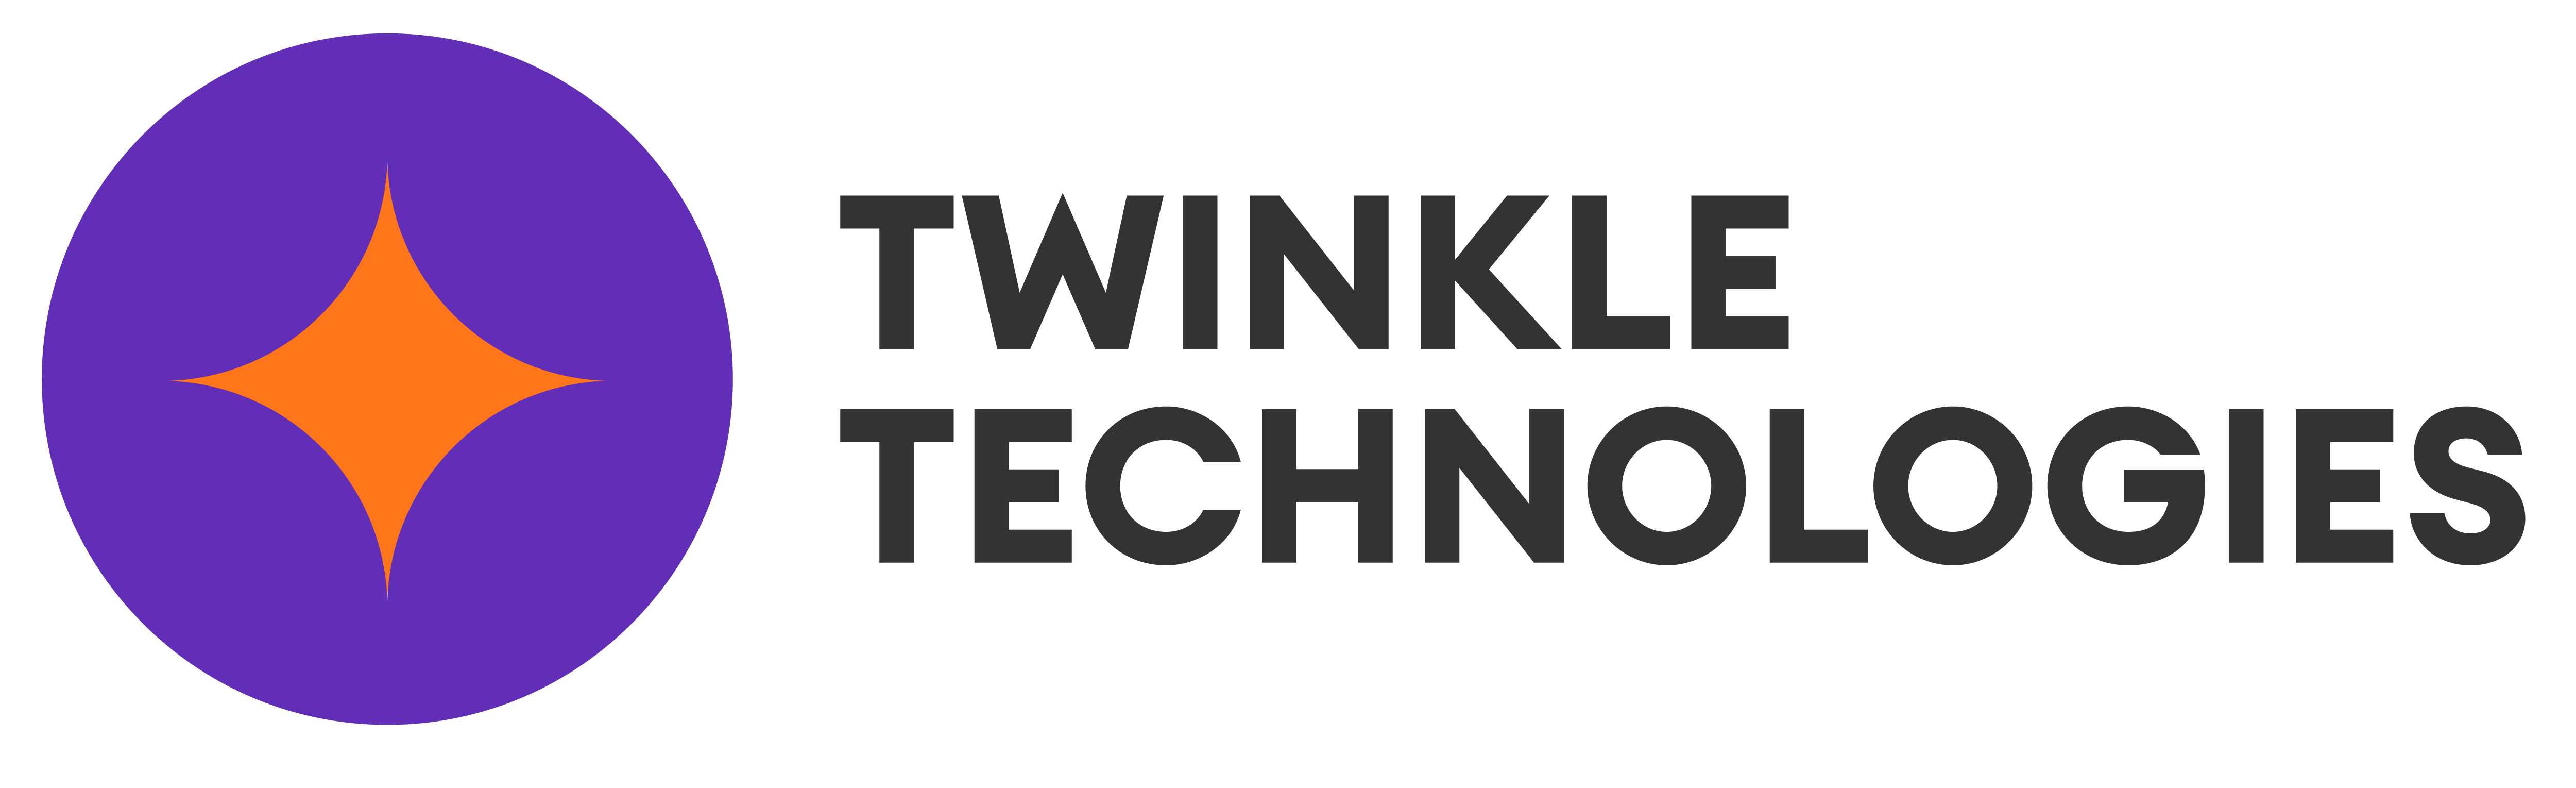 Twinkle Technologies Limited